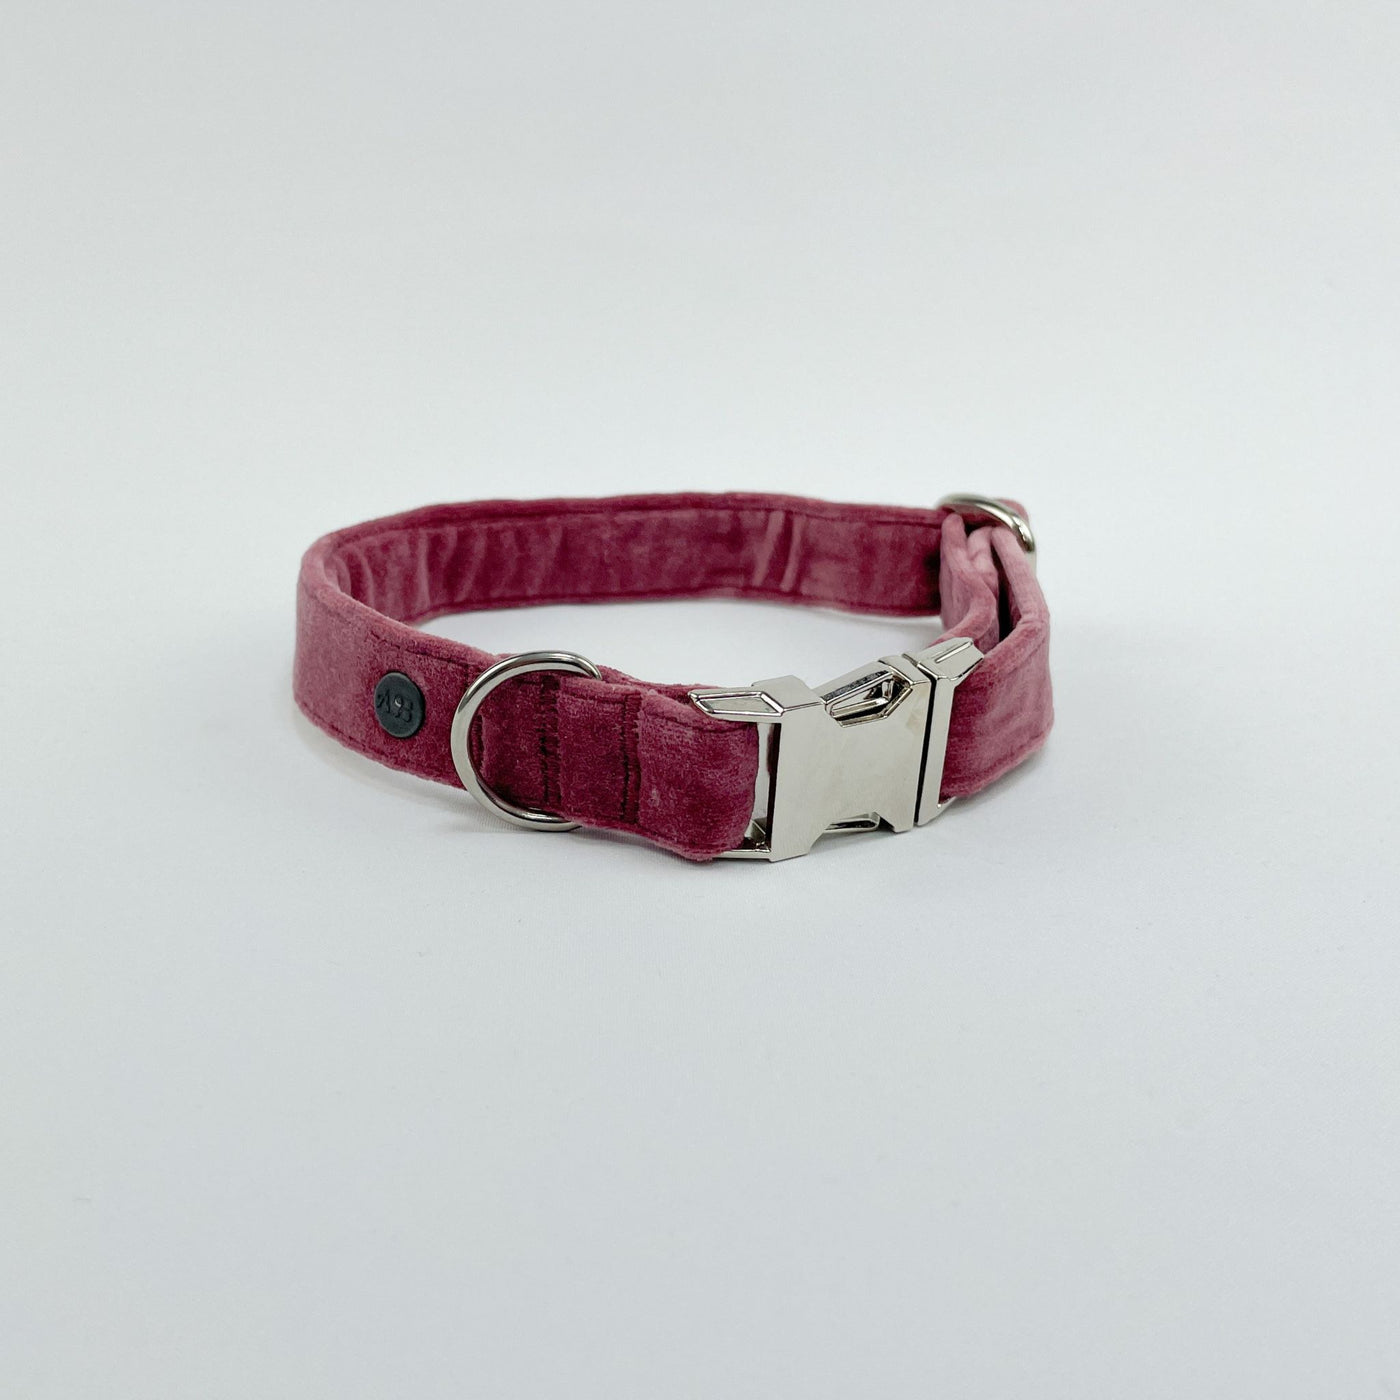 Luxury Blush Pink Velvet Dog Collar with chrome D-Ring  and quick-release clip.